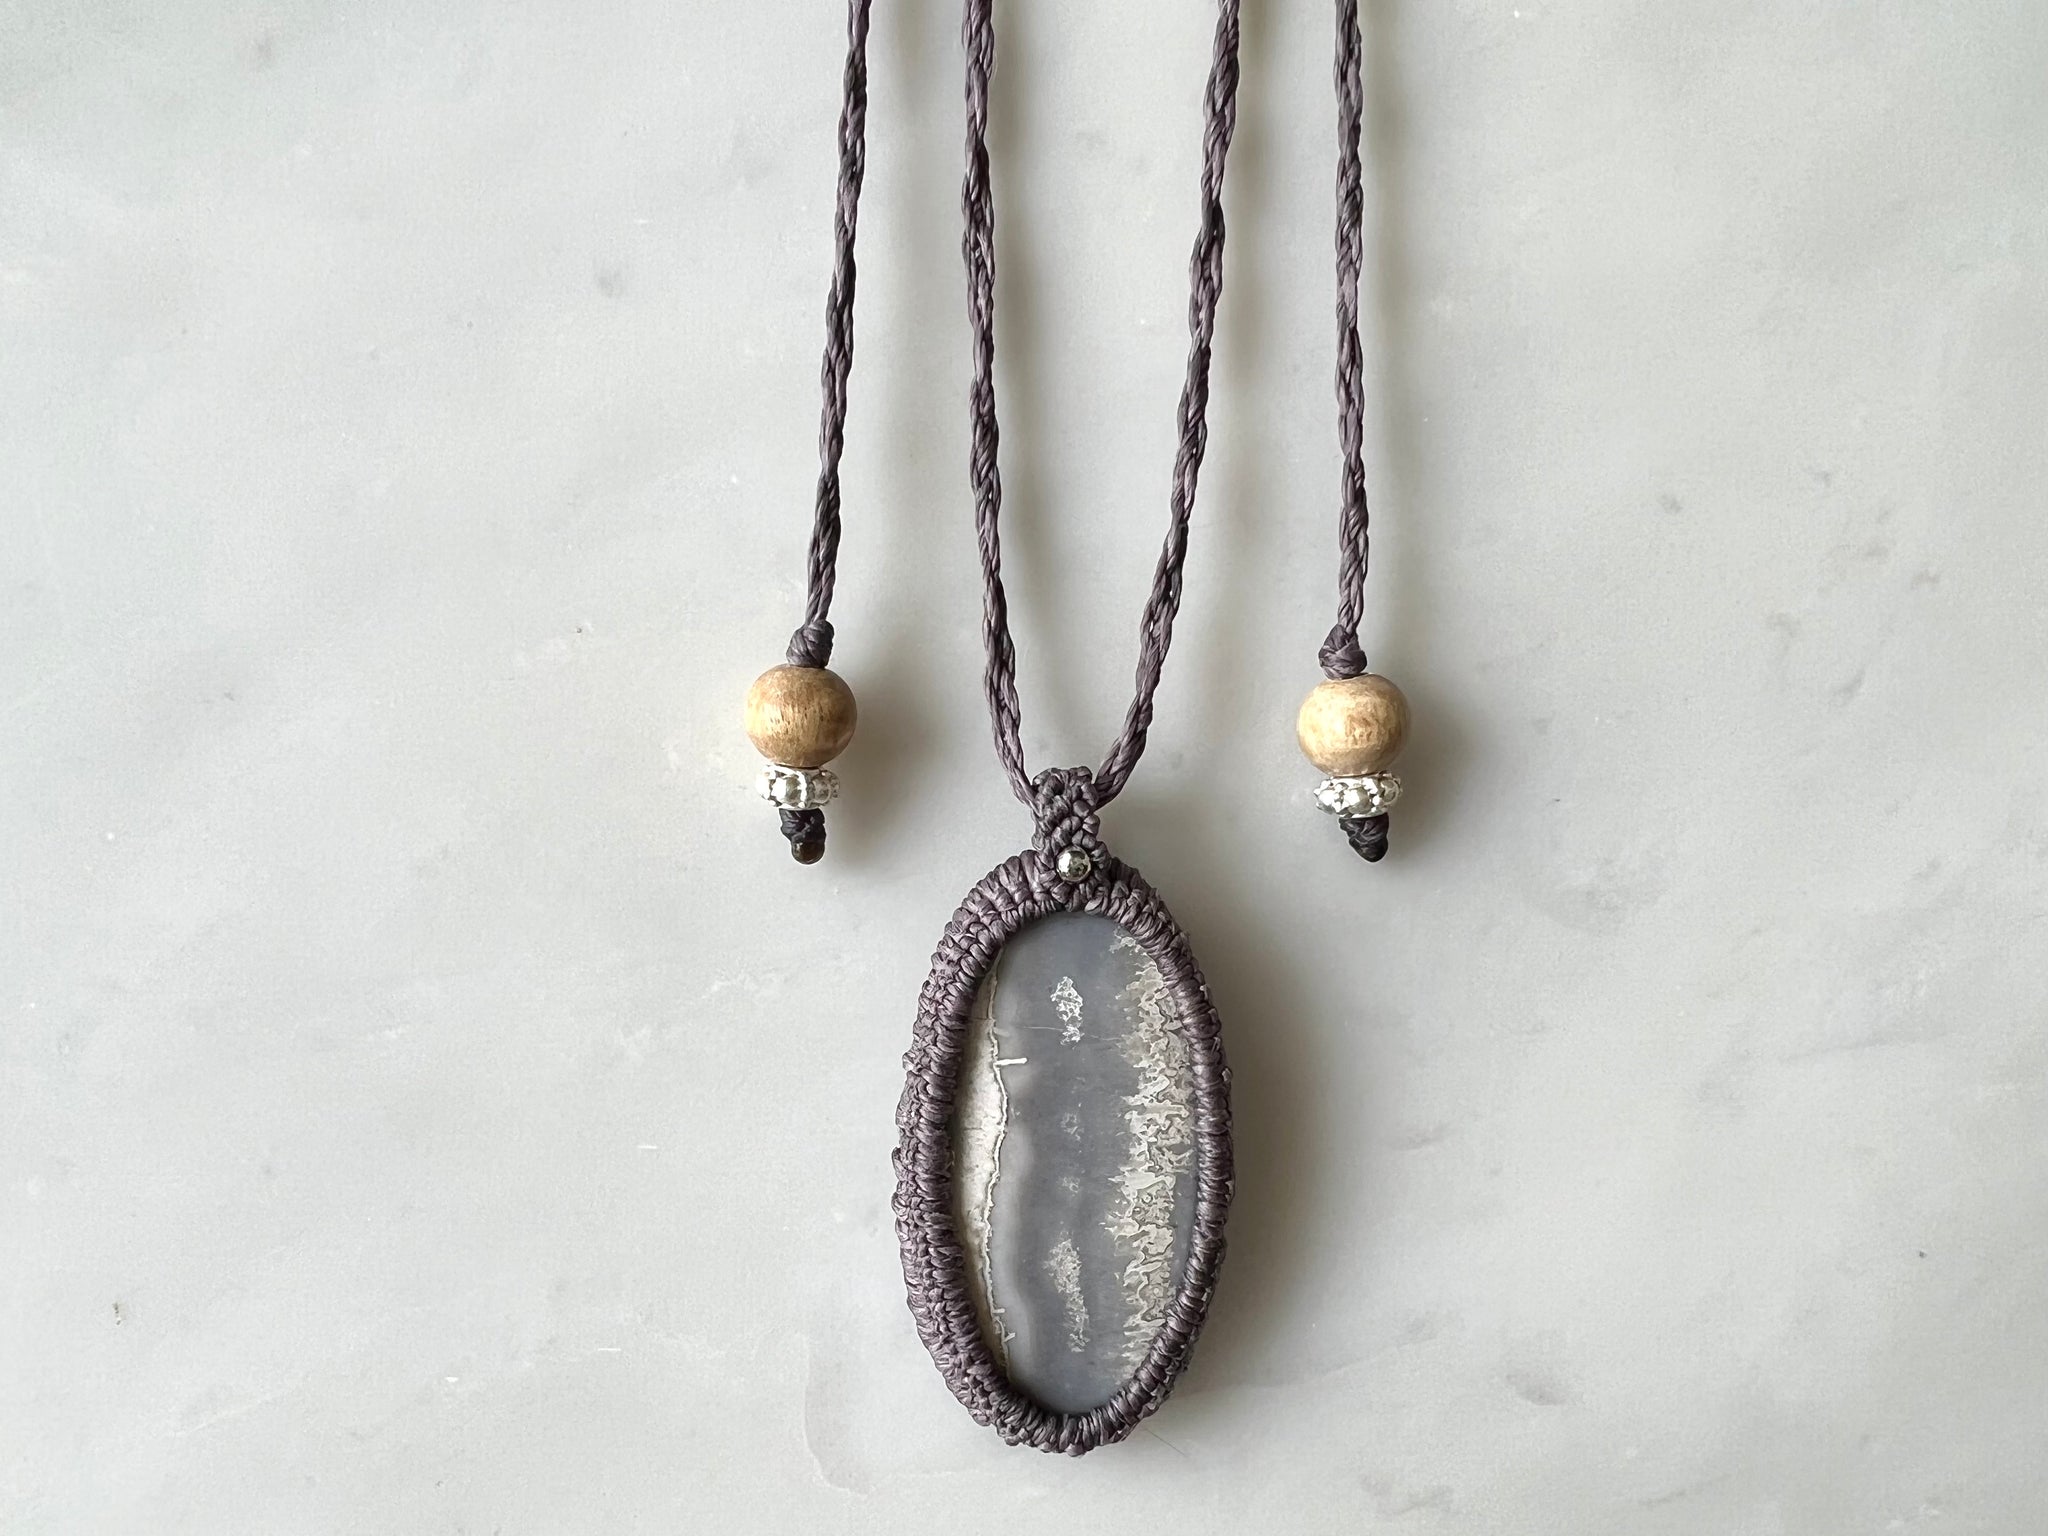 #2 Gray Lace Agate Macrame Necklace / グレーレースアゲート　マクラメ編み　ネックレス